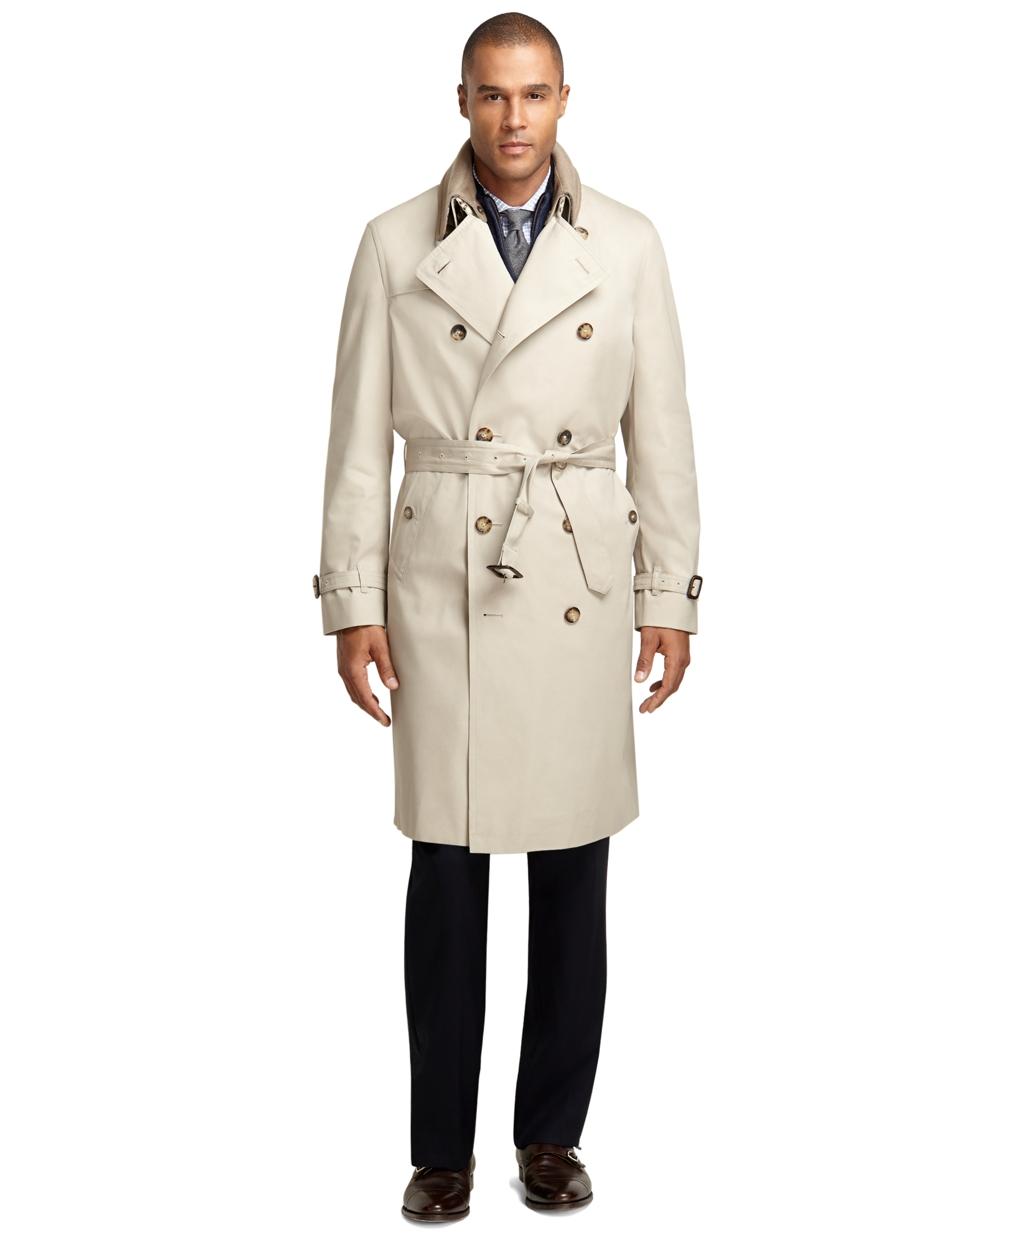 Lyst - Brooks Brothers Double-Breasted Khaki Trench in Natural for Men